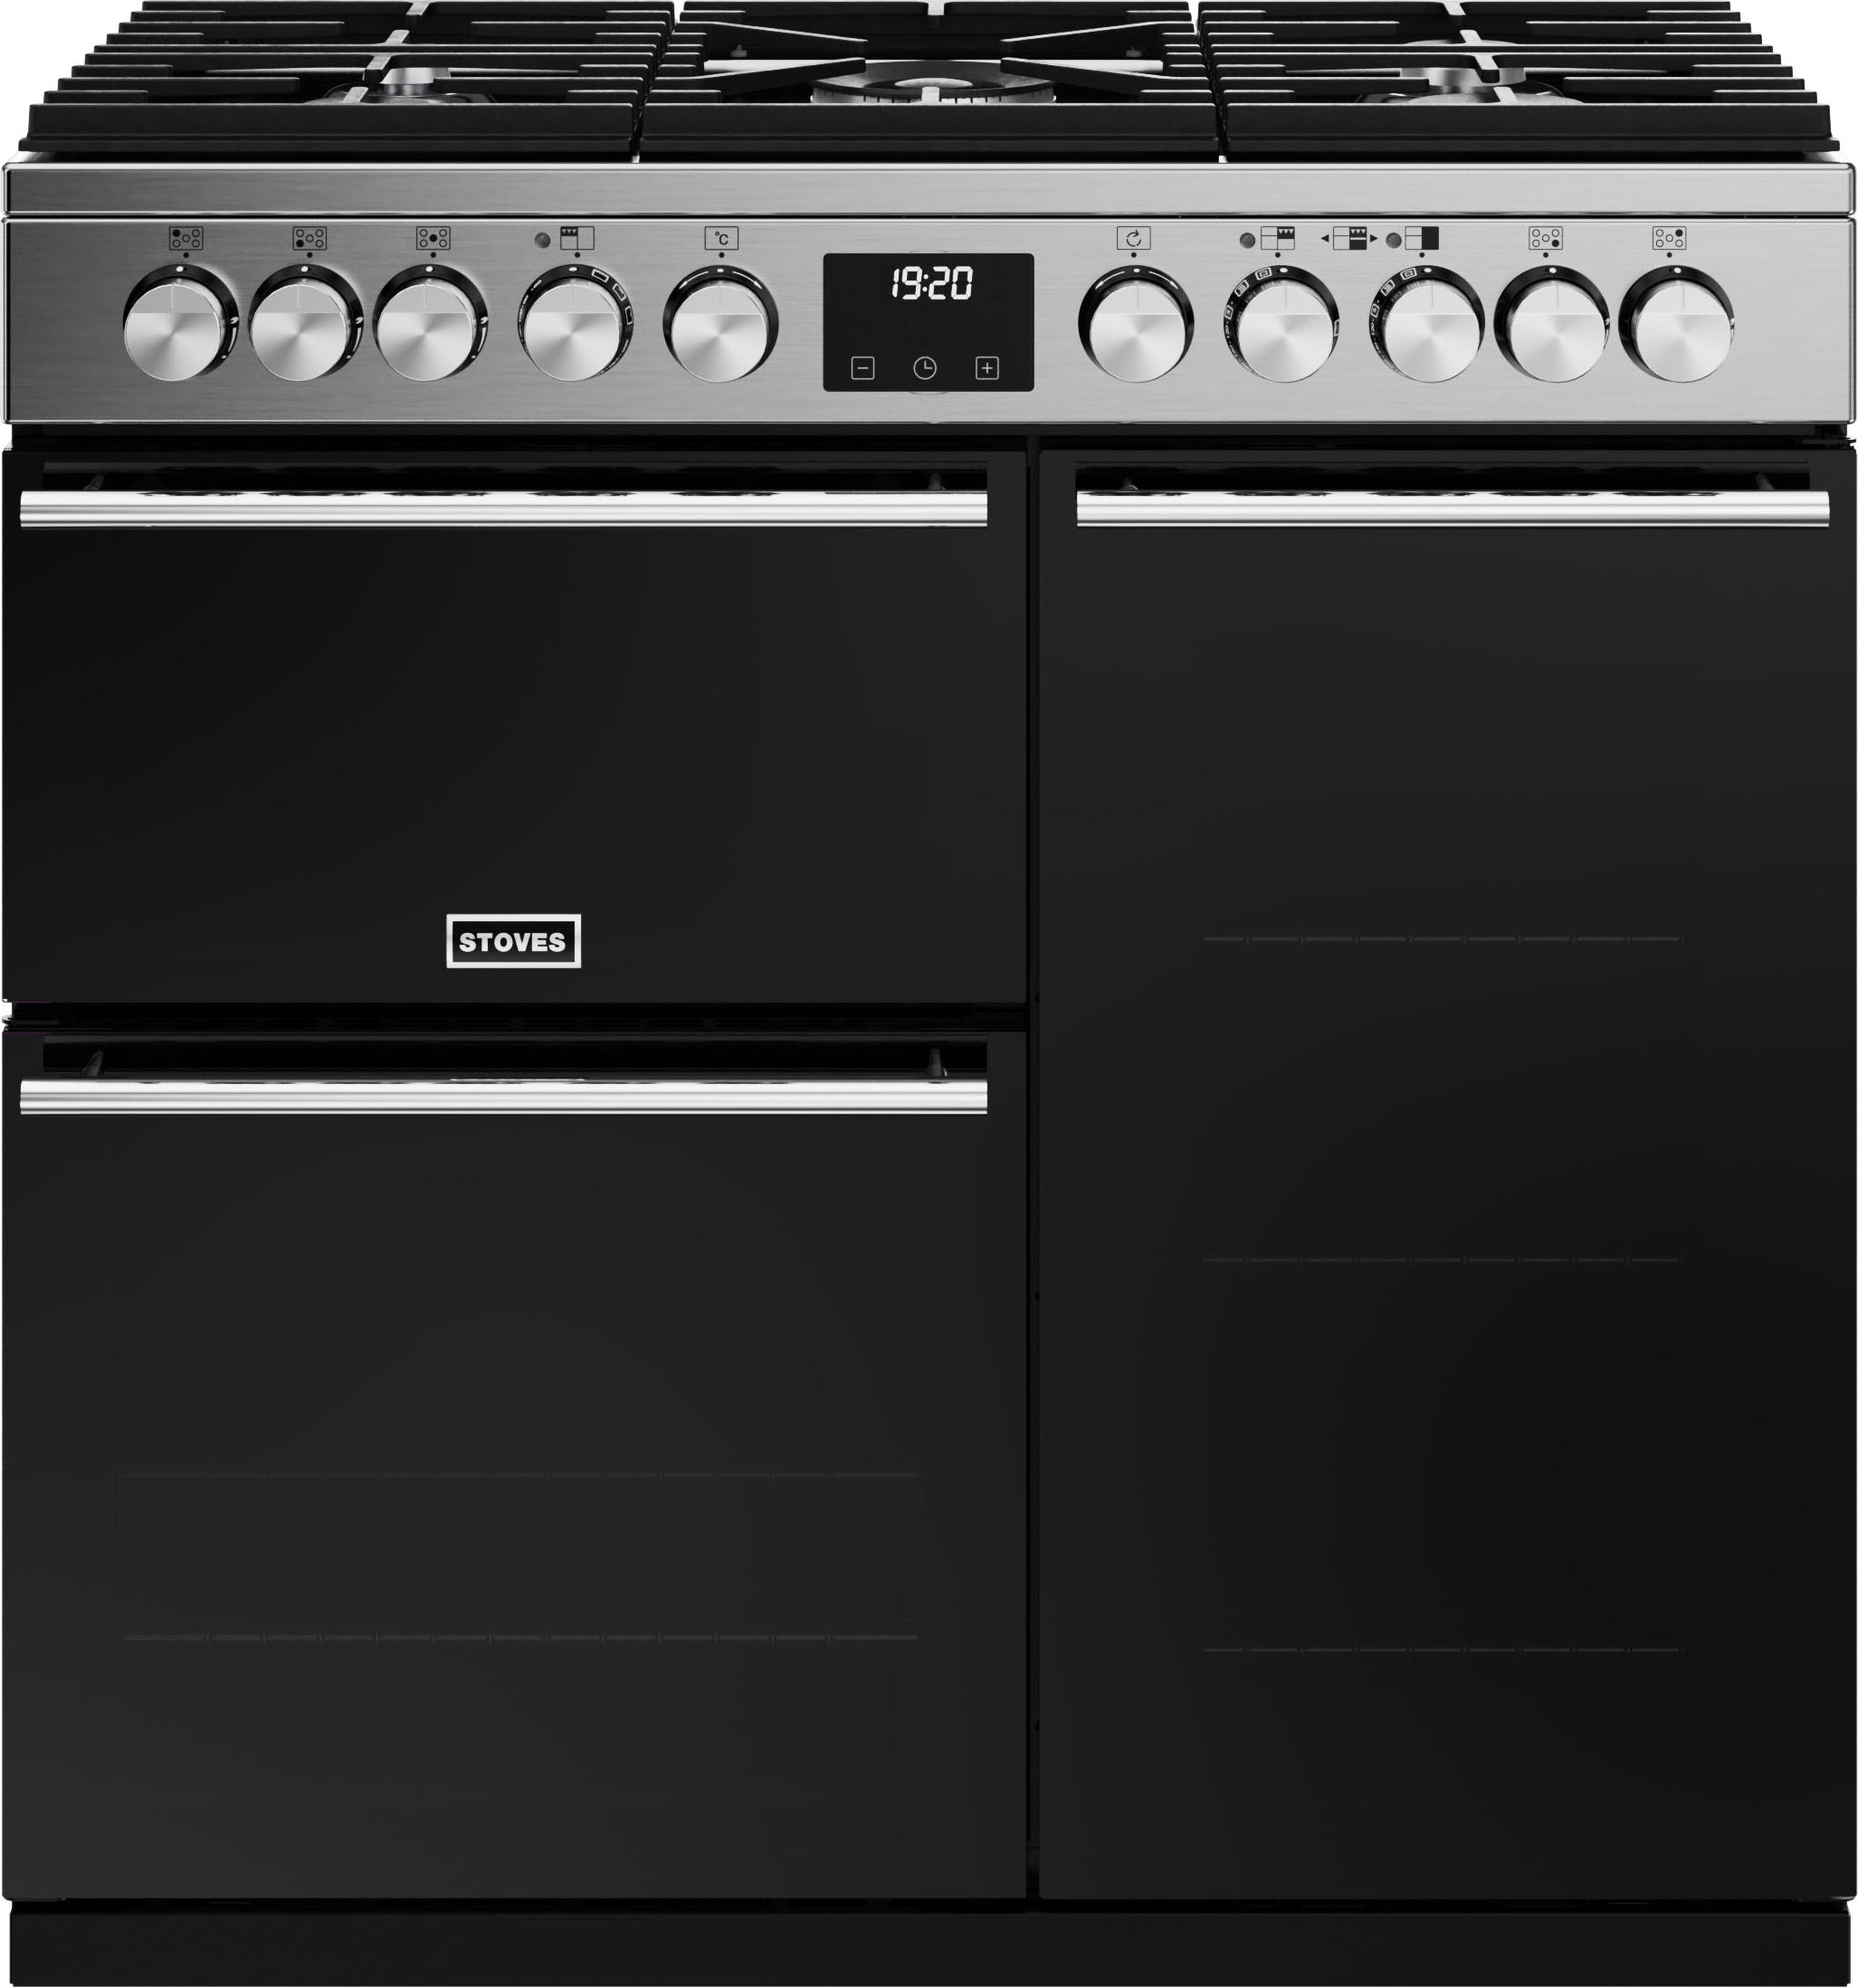 Stoves Precision Deluxe ST DX PREC D900DF SS Dual Fuel Range Cooker - Stainless Steel / Black - A/A/A Rated, Stainless Steel